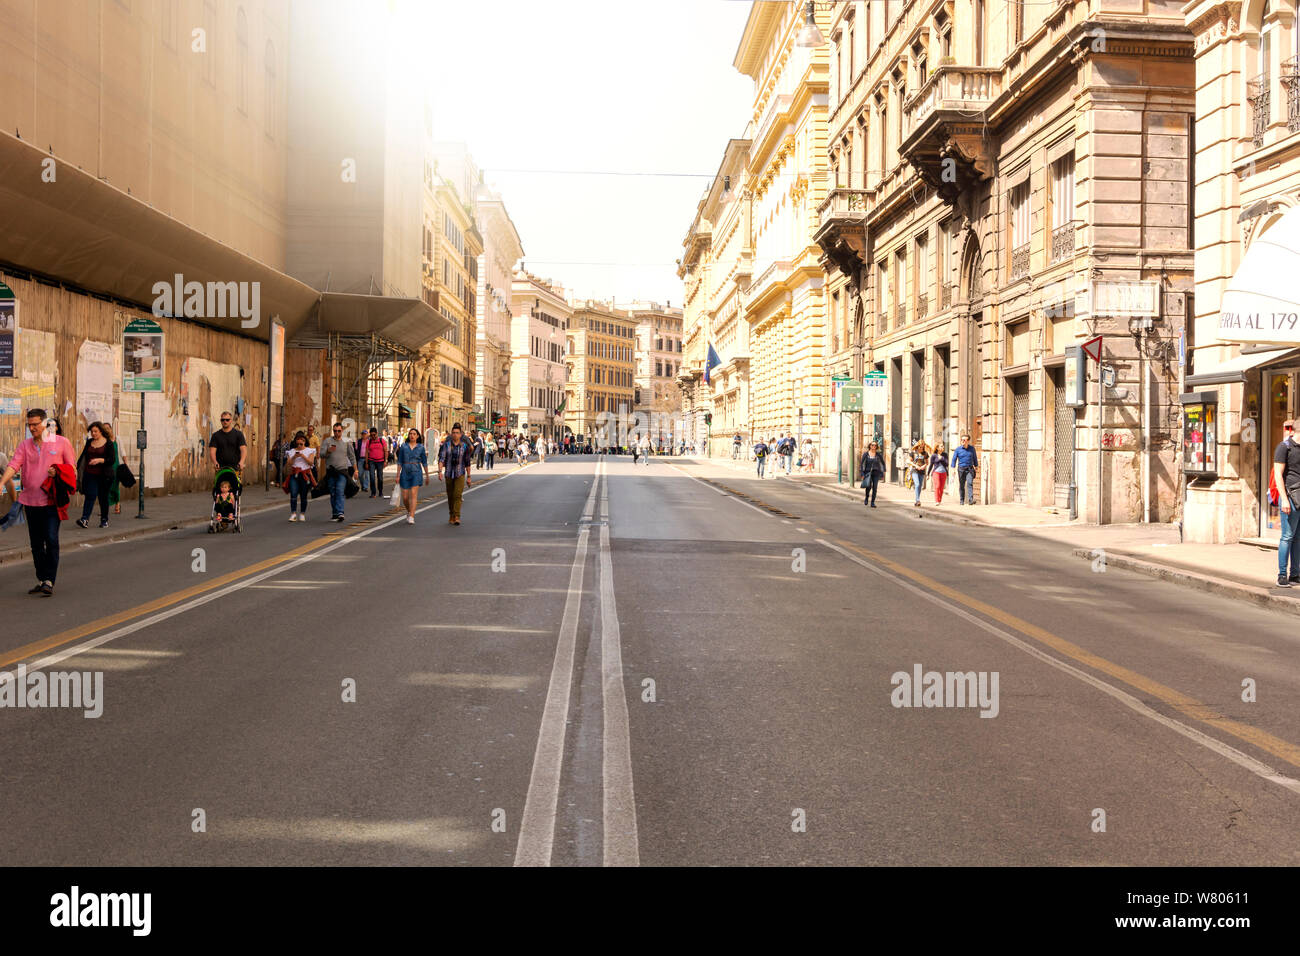 Rome, Italy, 8 April 2018: people walking along Corso Vittorio Emanuele II, an important street that connects the historic center of Rome to the Vatic Stock Photo